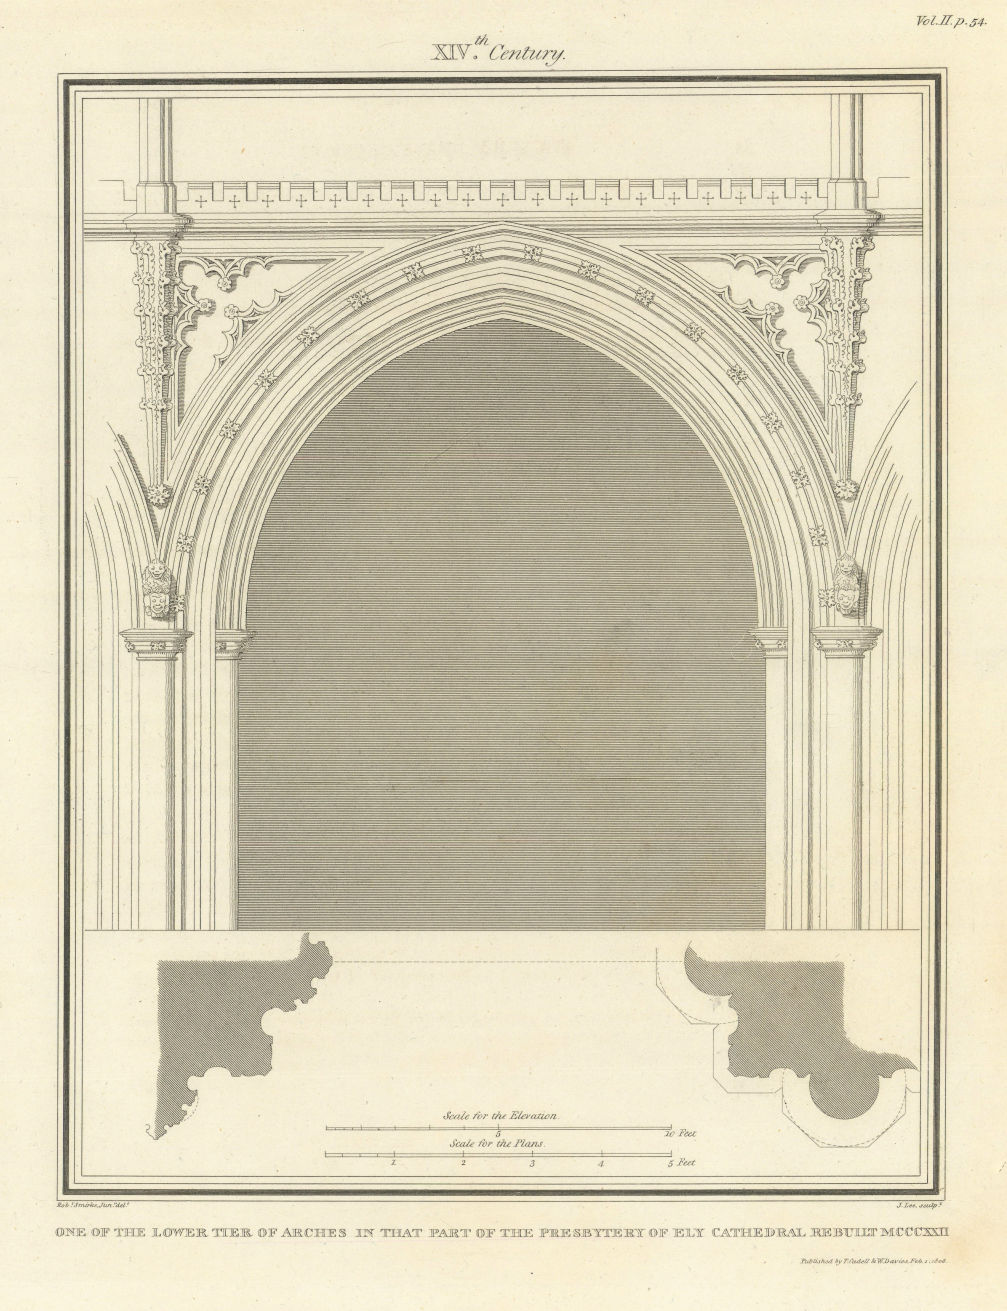 One of the lower tier of arches in the Presbytery of Ely Cathedral. SMIRKE 1810